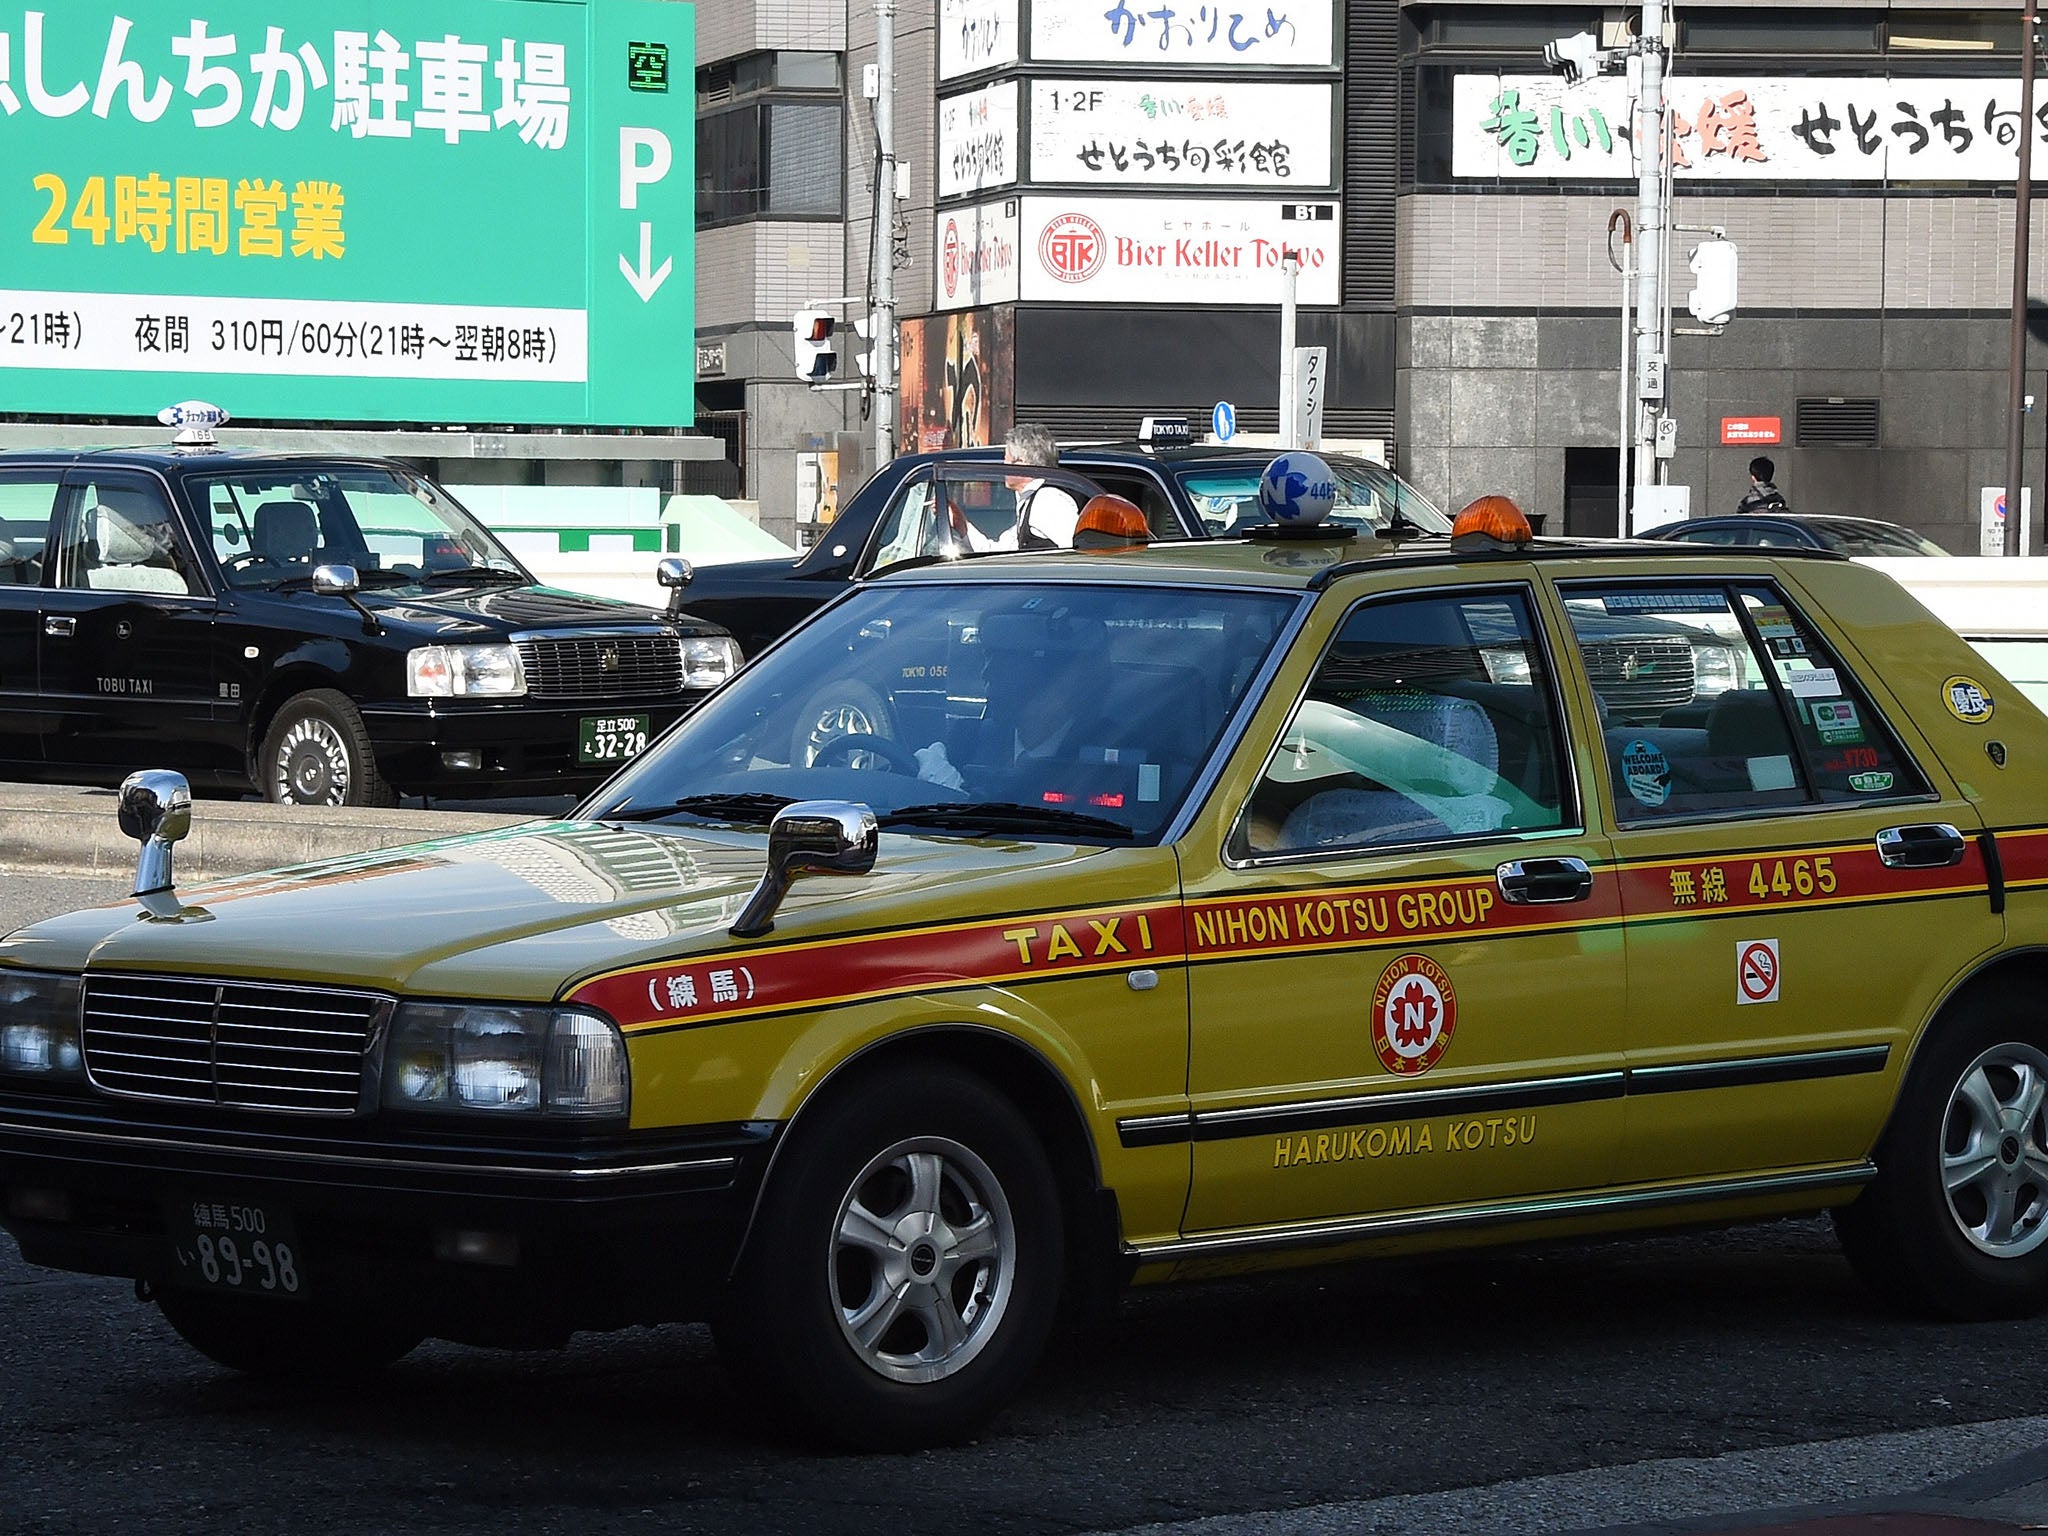 Silent Taxis Japanese Cab Company Bans Drivers From Starting Conversations The Independent The Independent